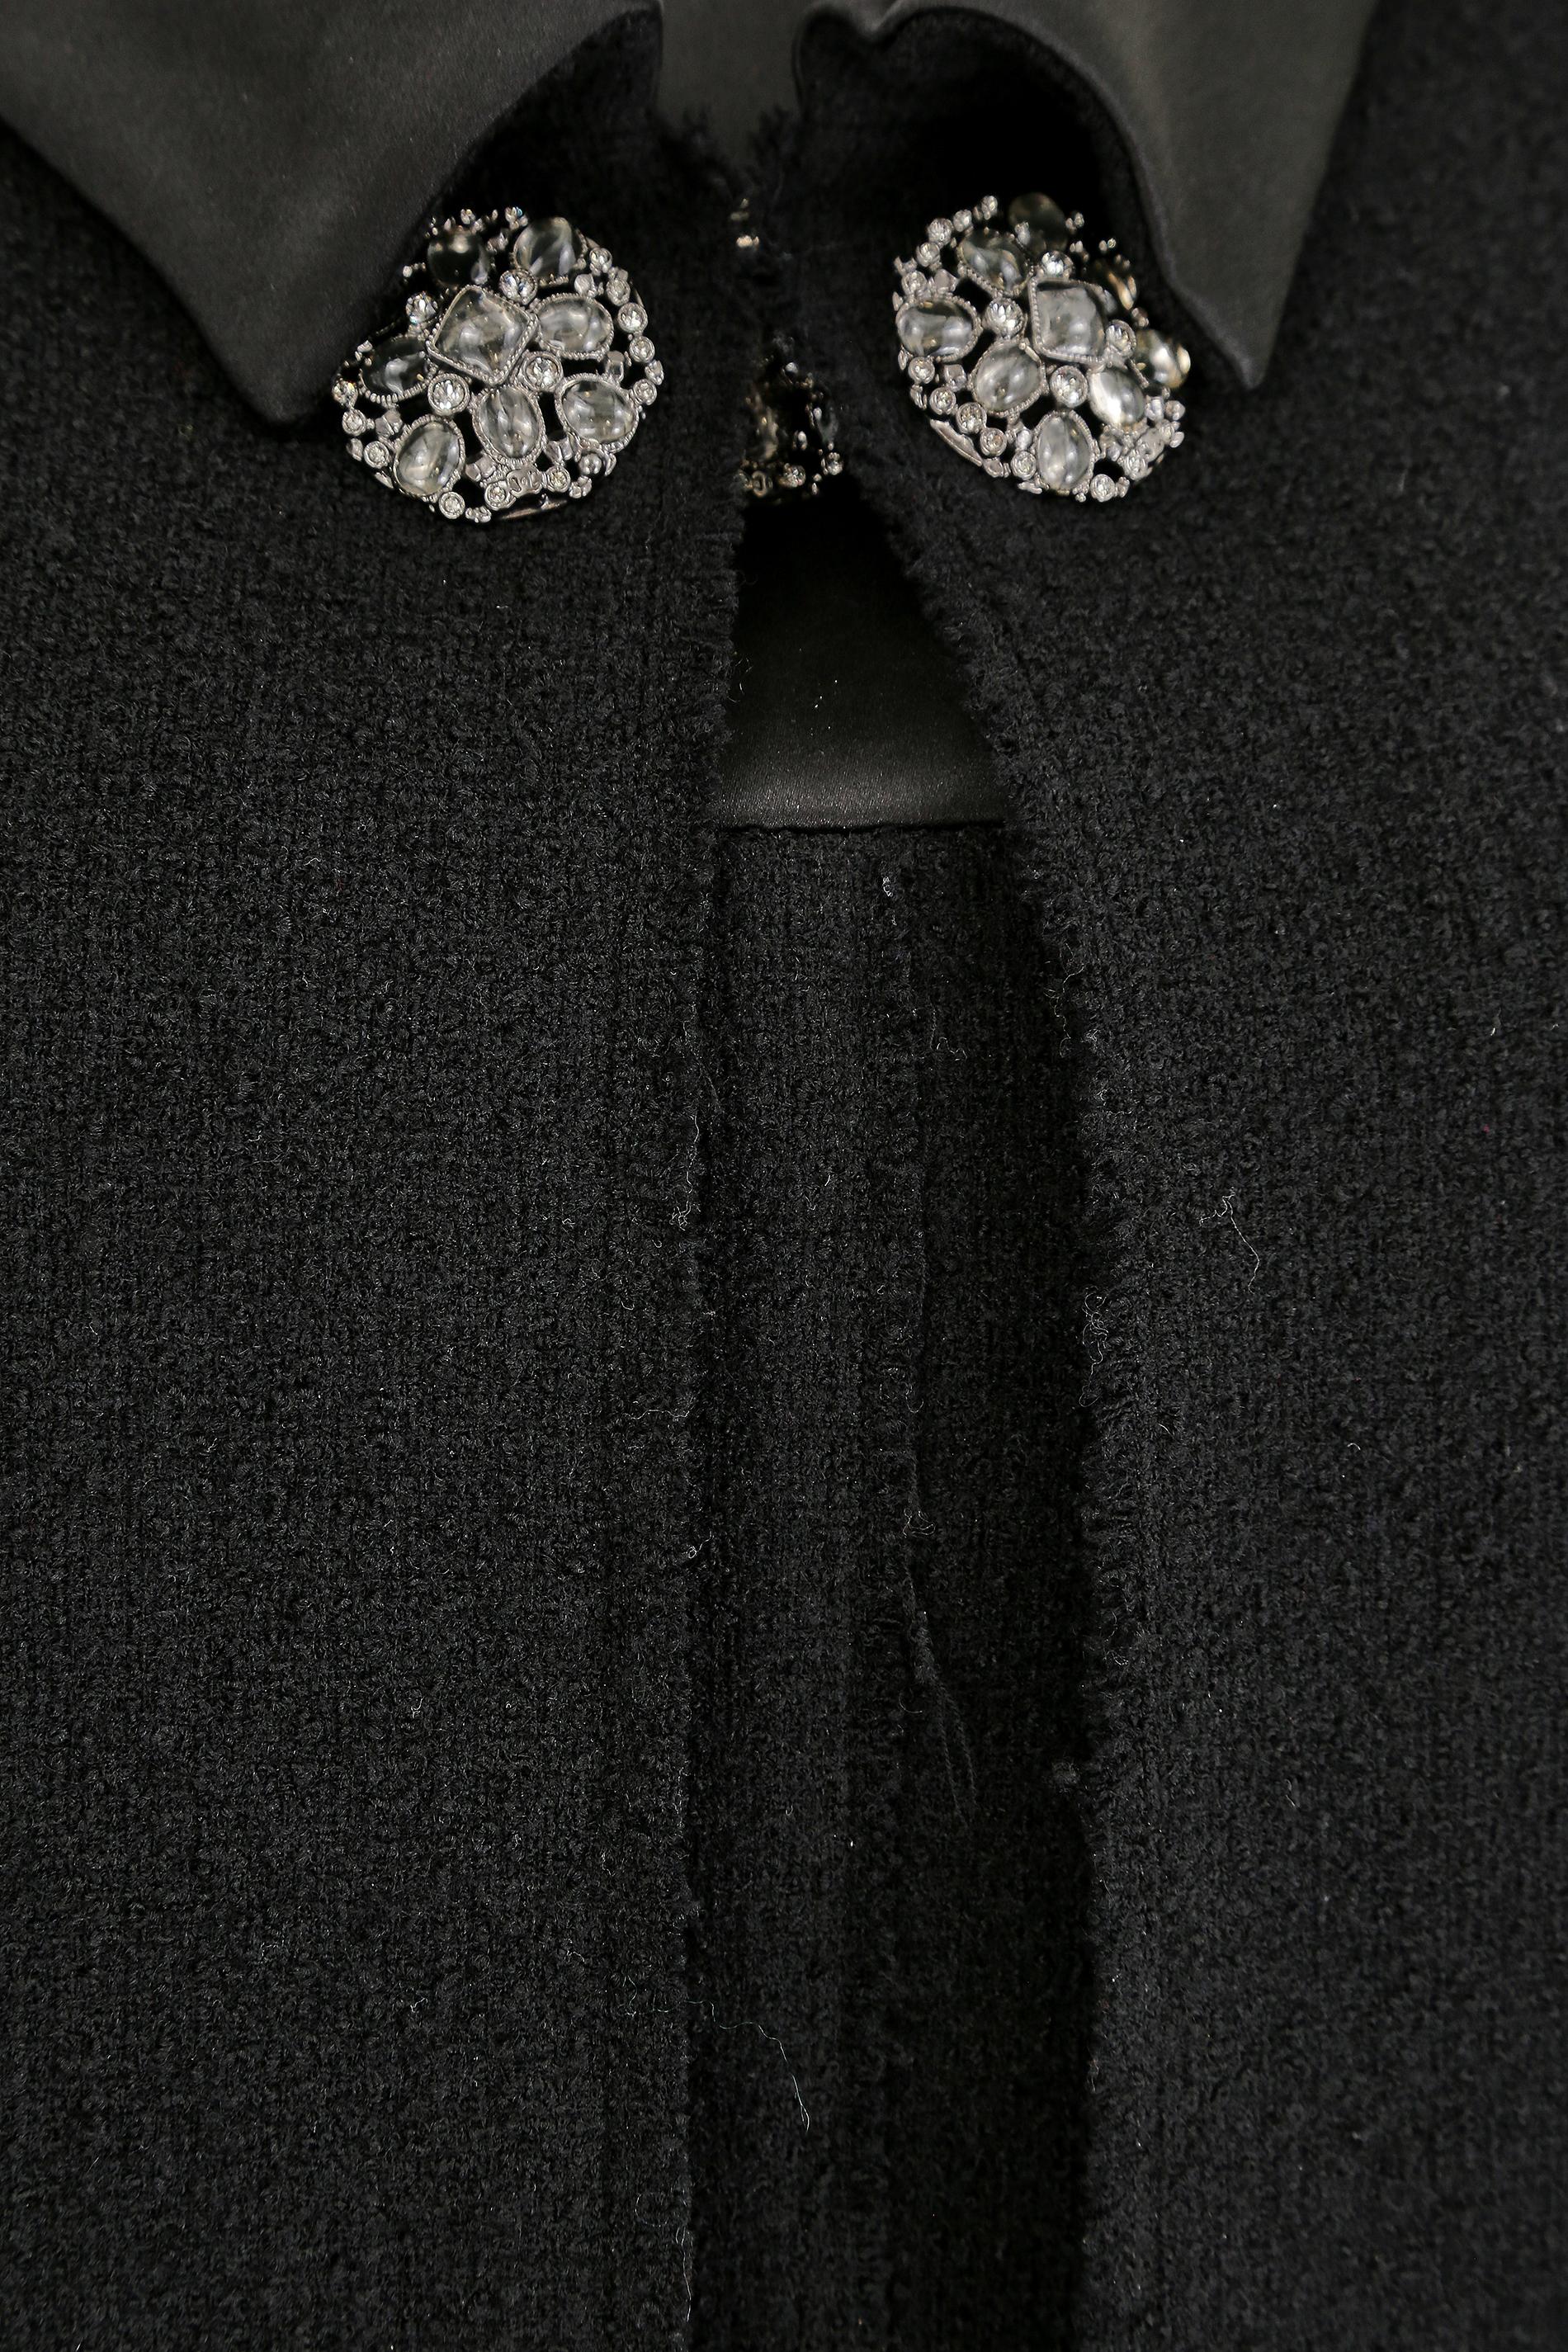 2015 Chanel Black Boucle Wool and Gripoix Dress Suit For Sale 2